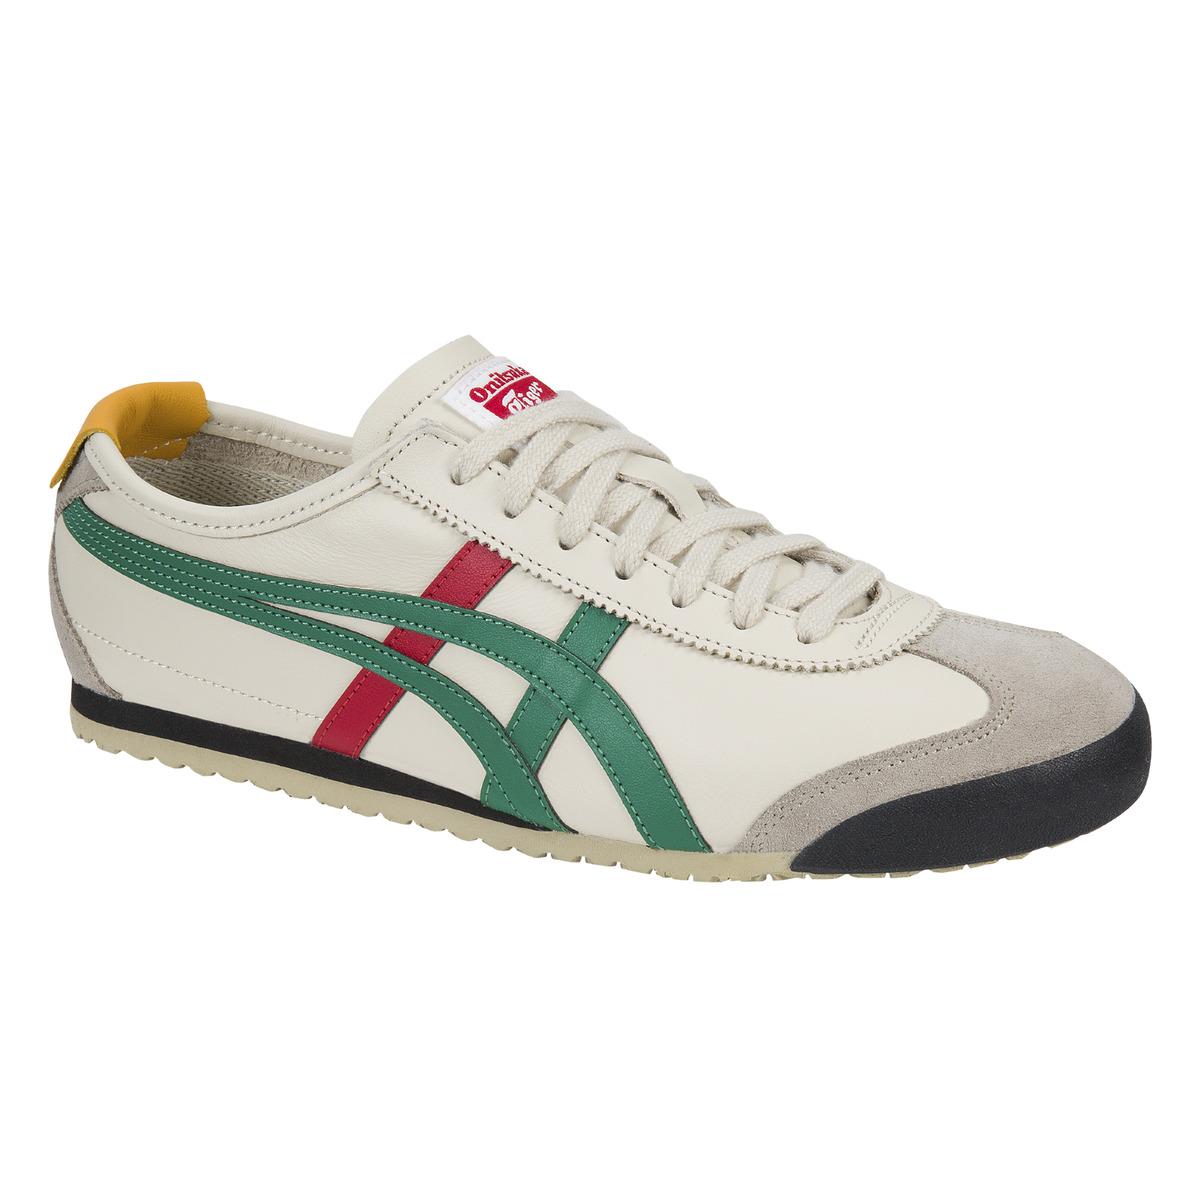 Asics Leather Onitsuka Tiger Mexico 66 Casual Trainers in White / Green ...